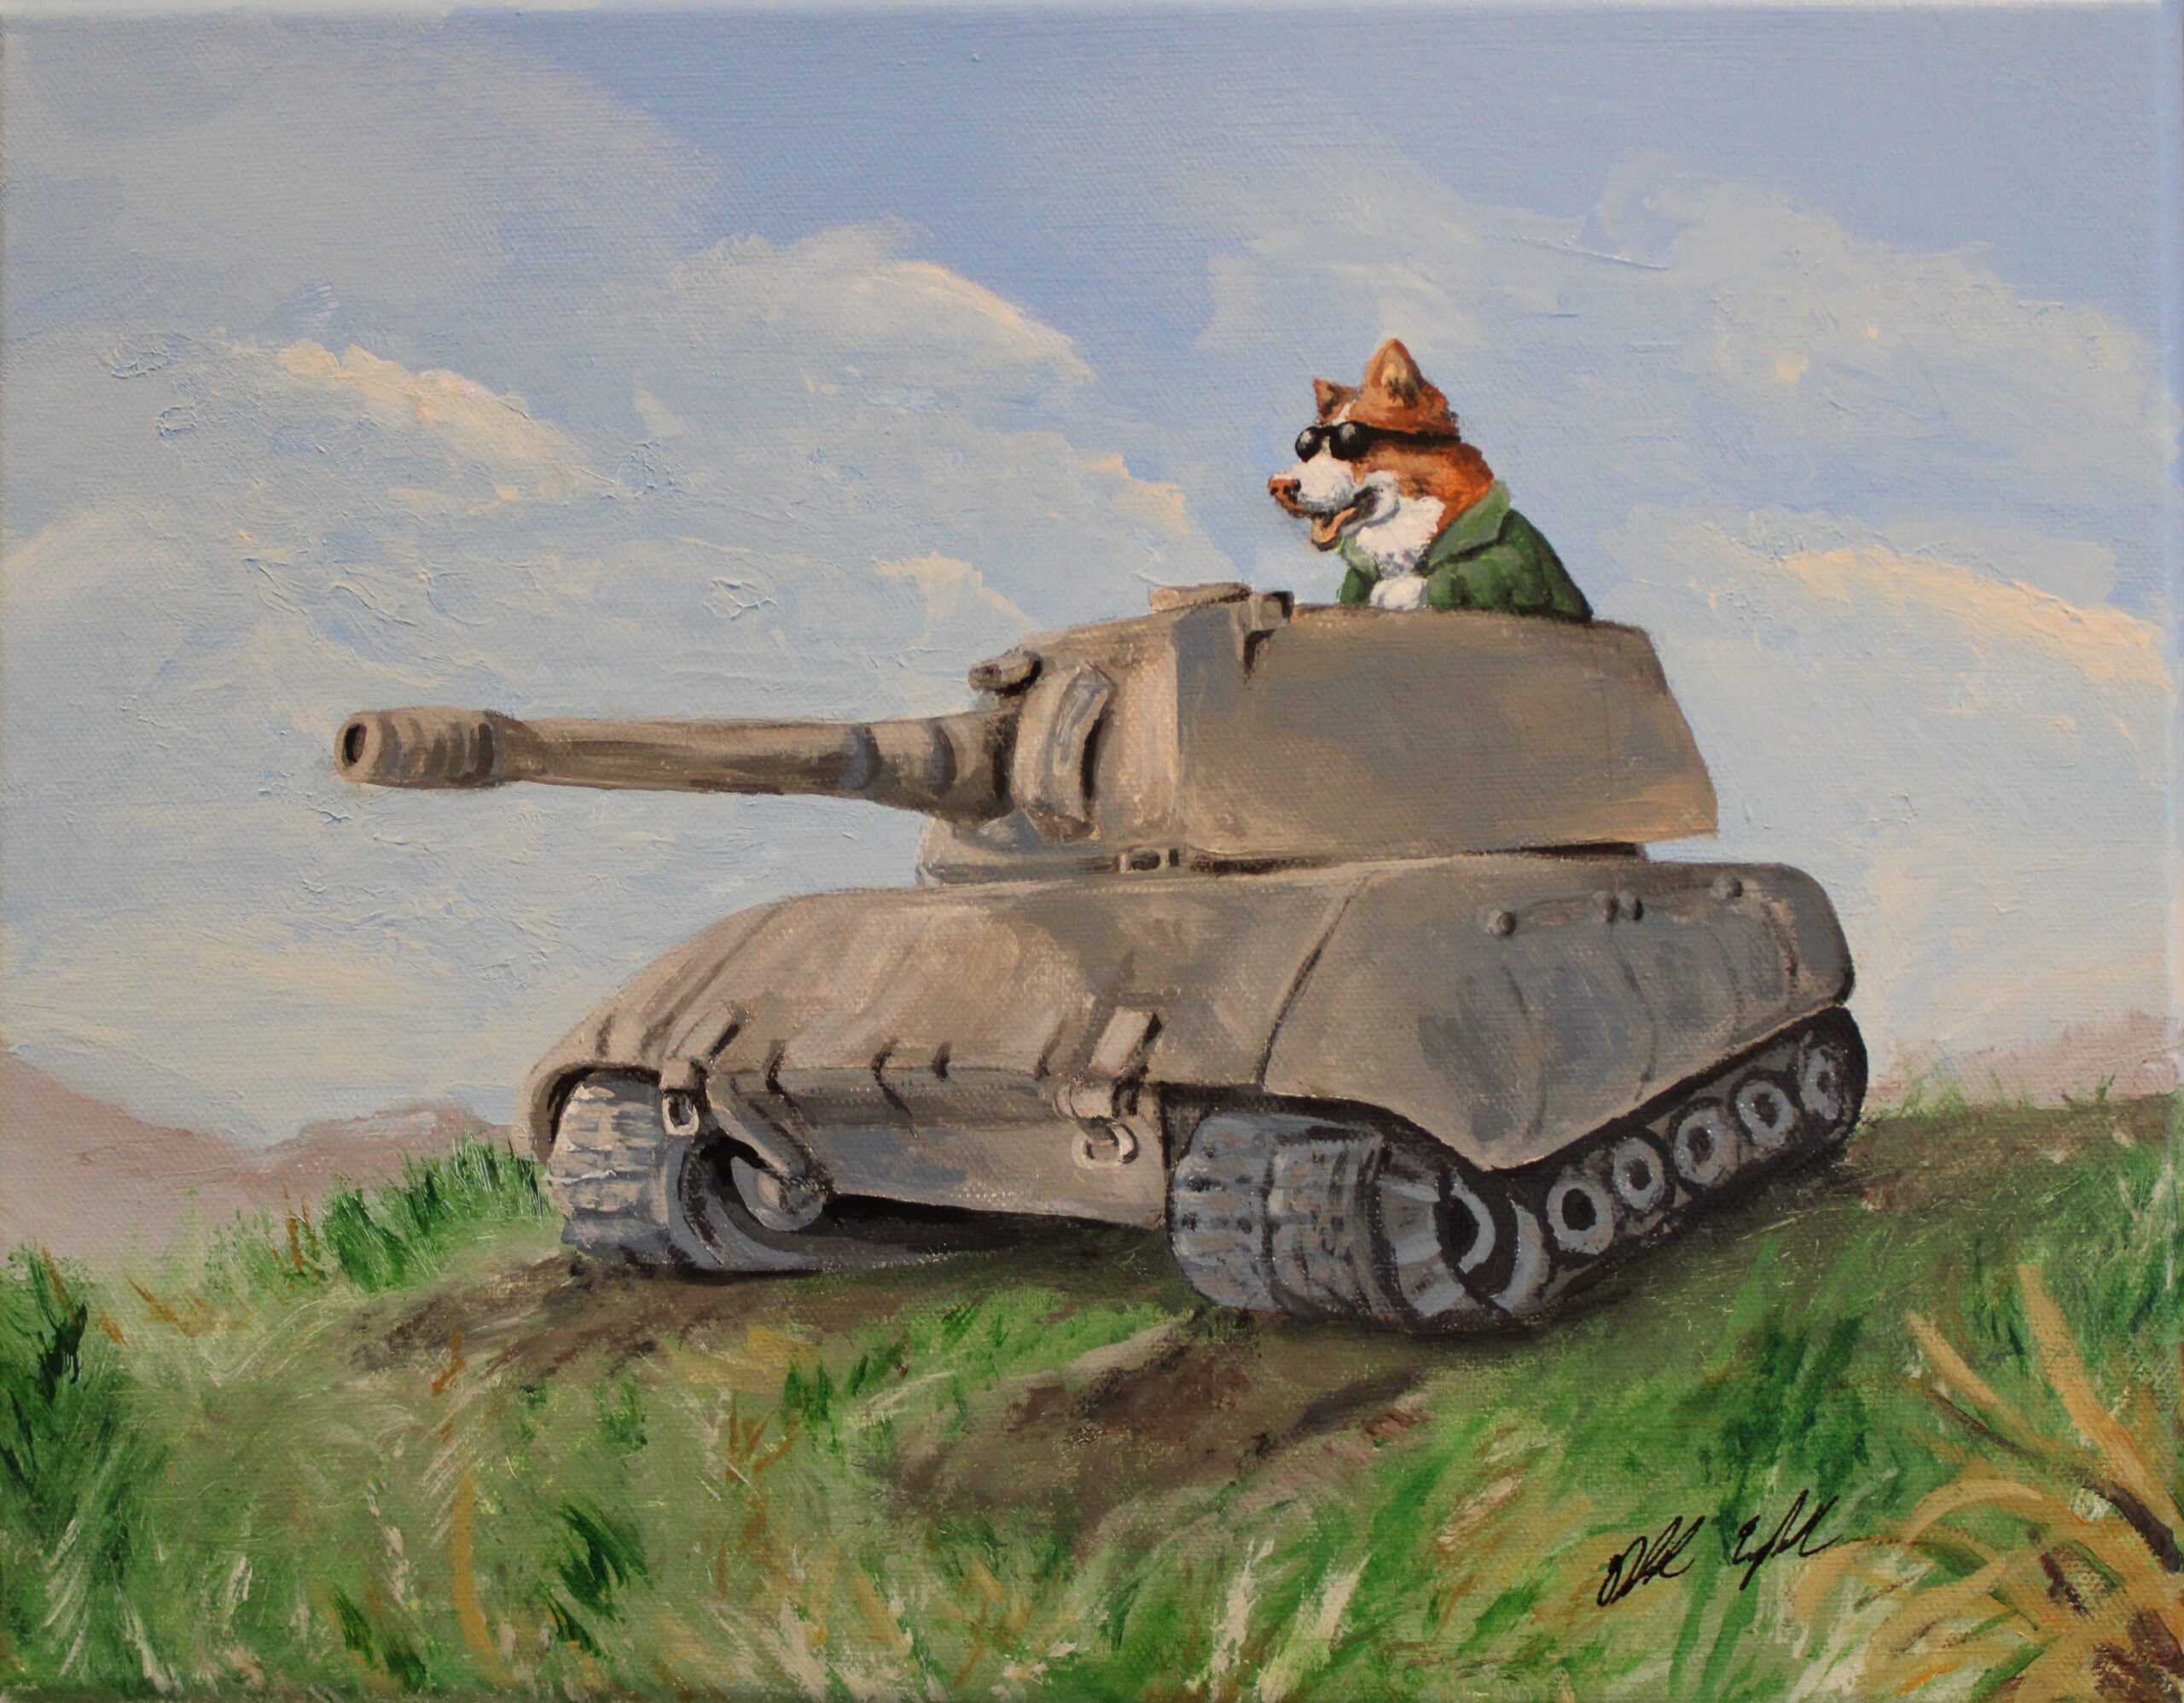 Strive in opposition to Corgi – painting by Deb Campbell